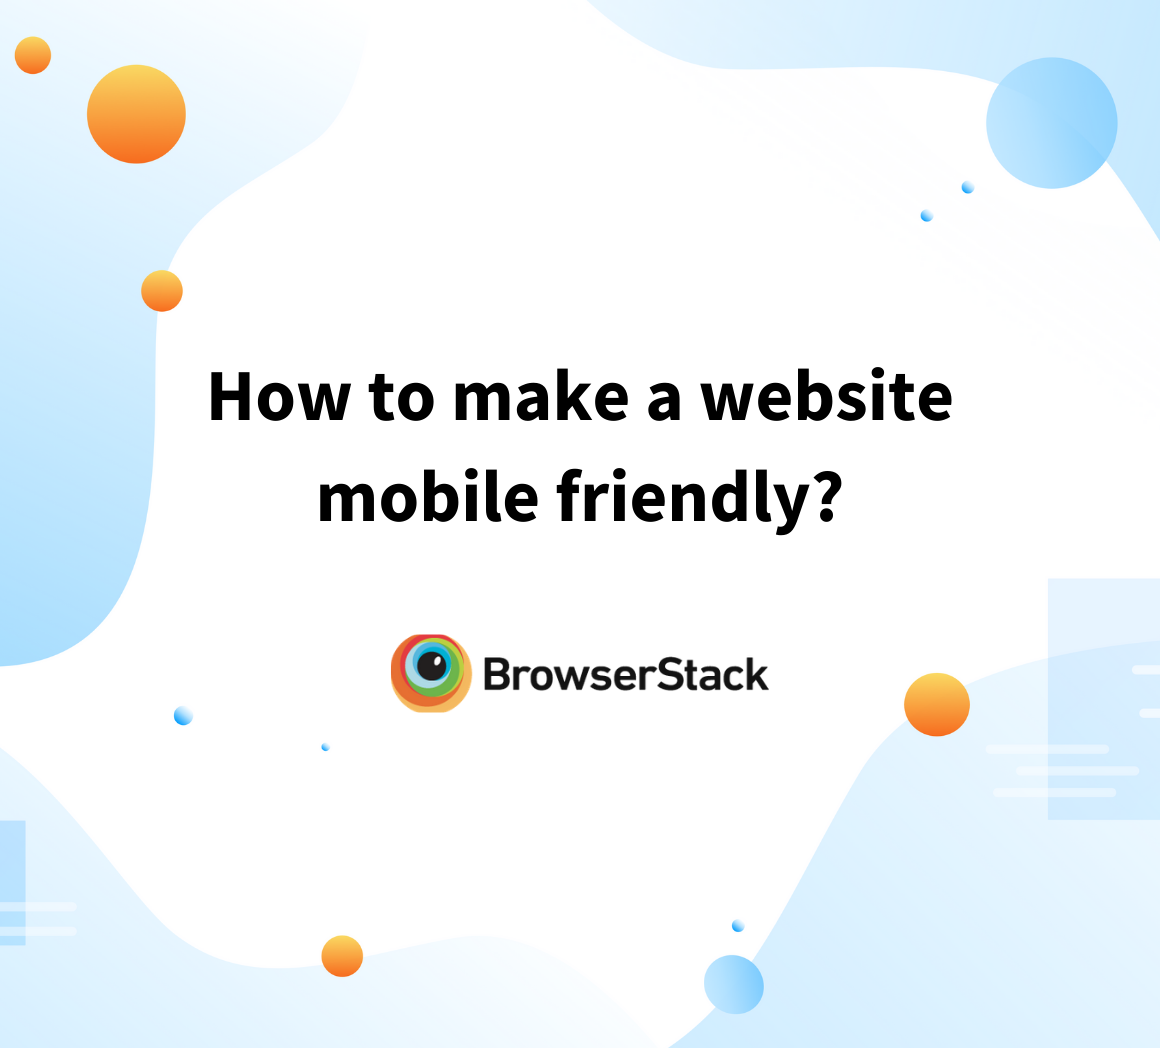 How to make a website mobile friendly?